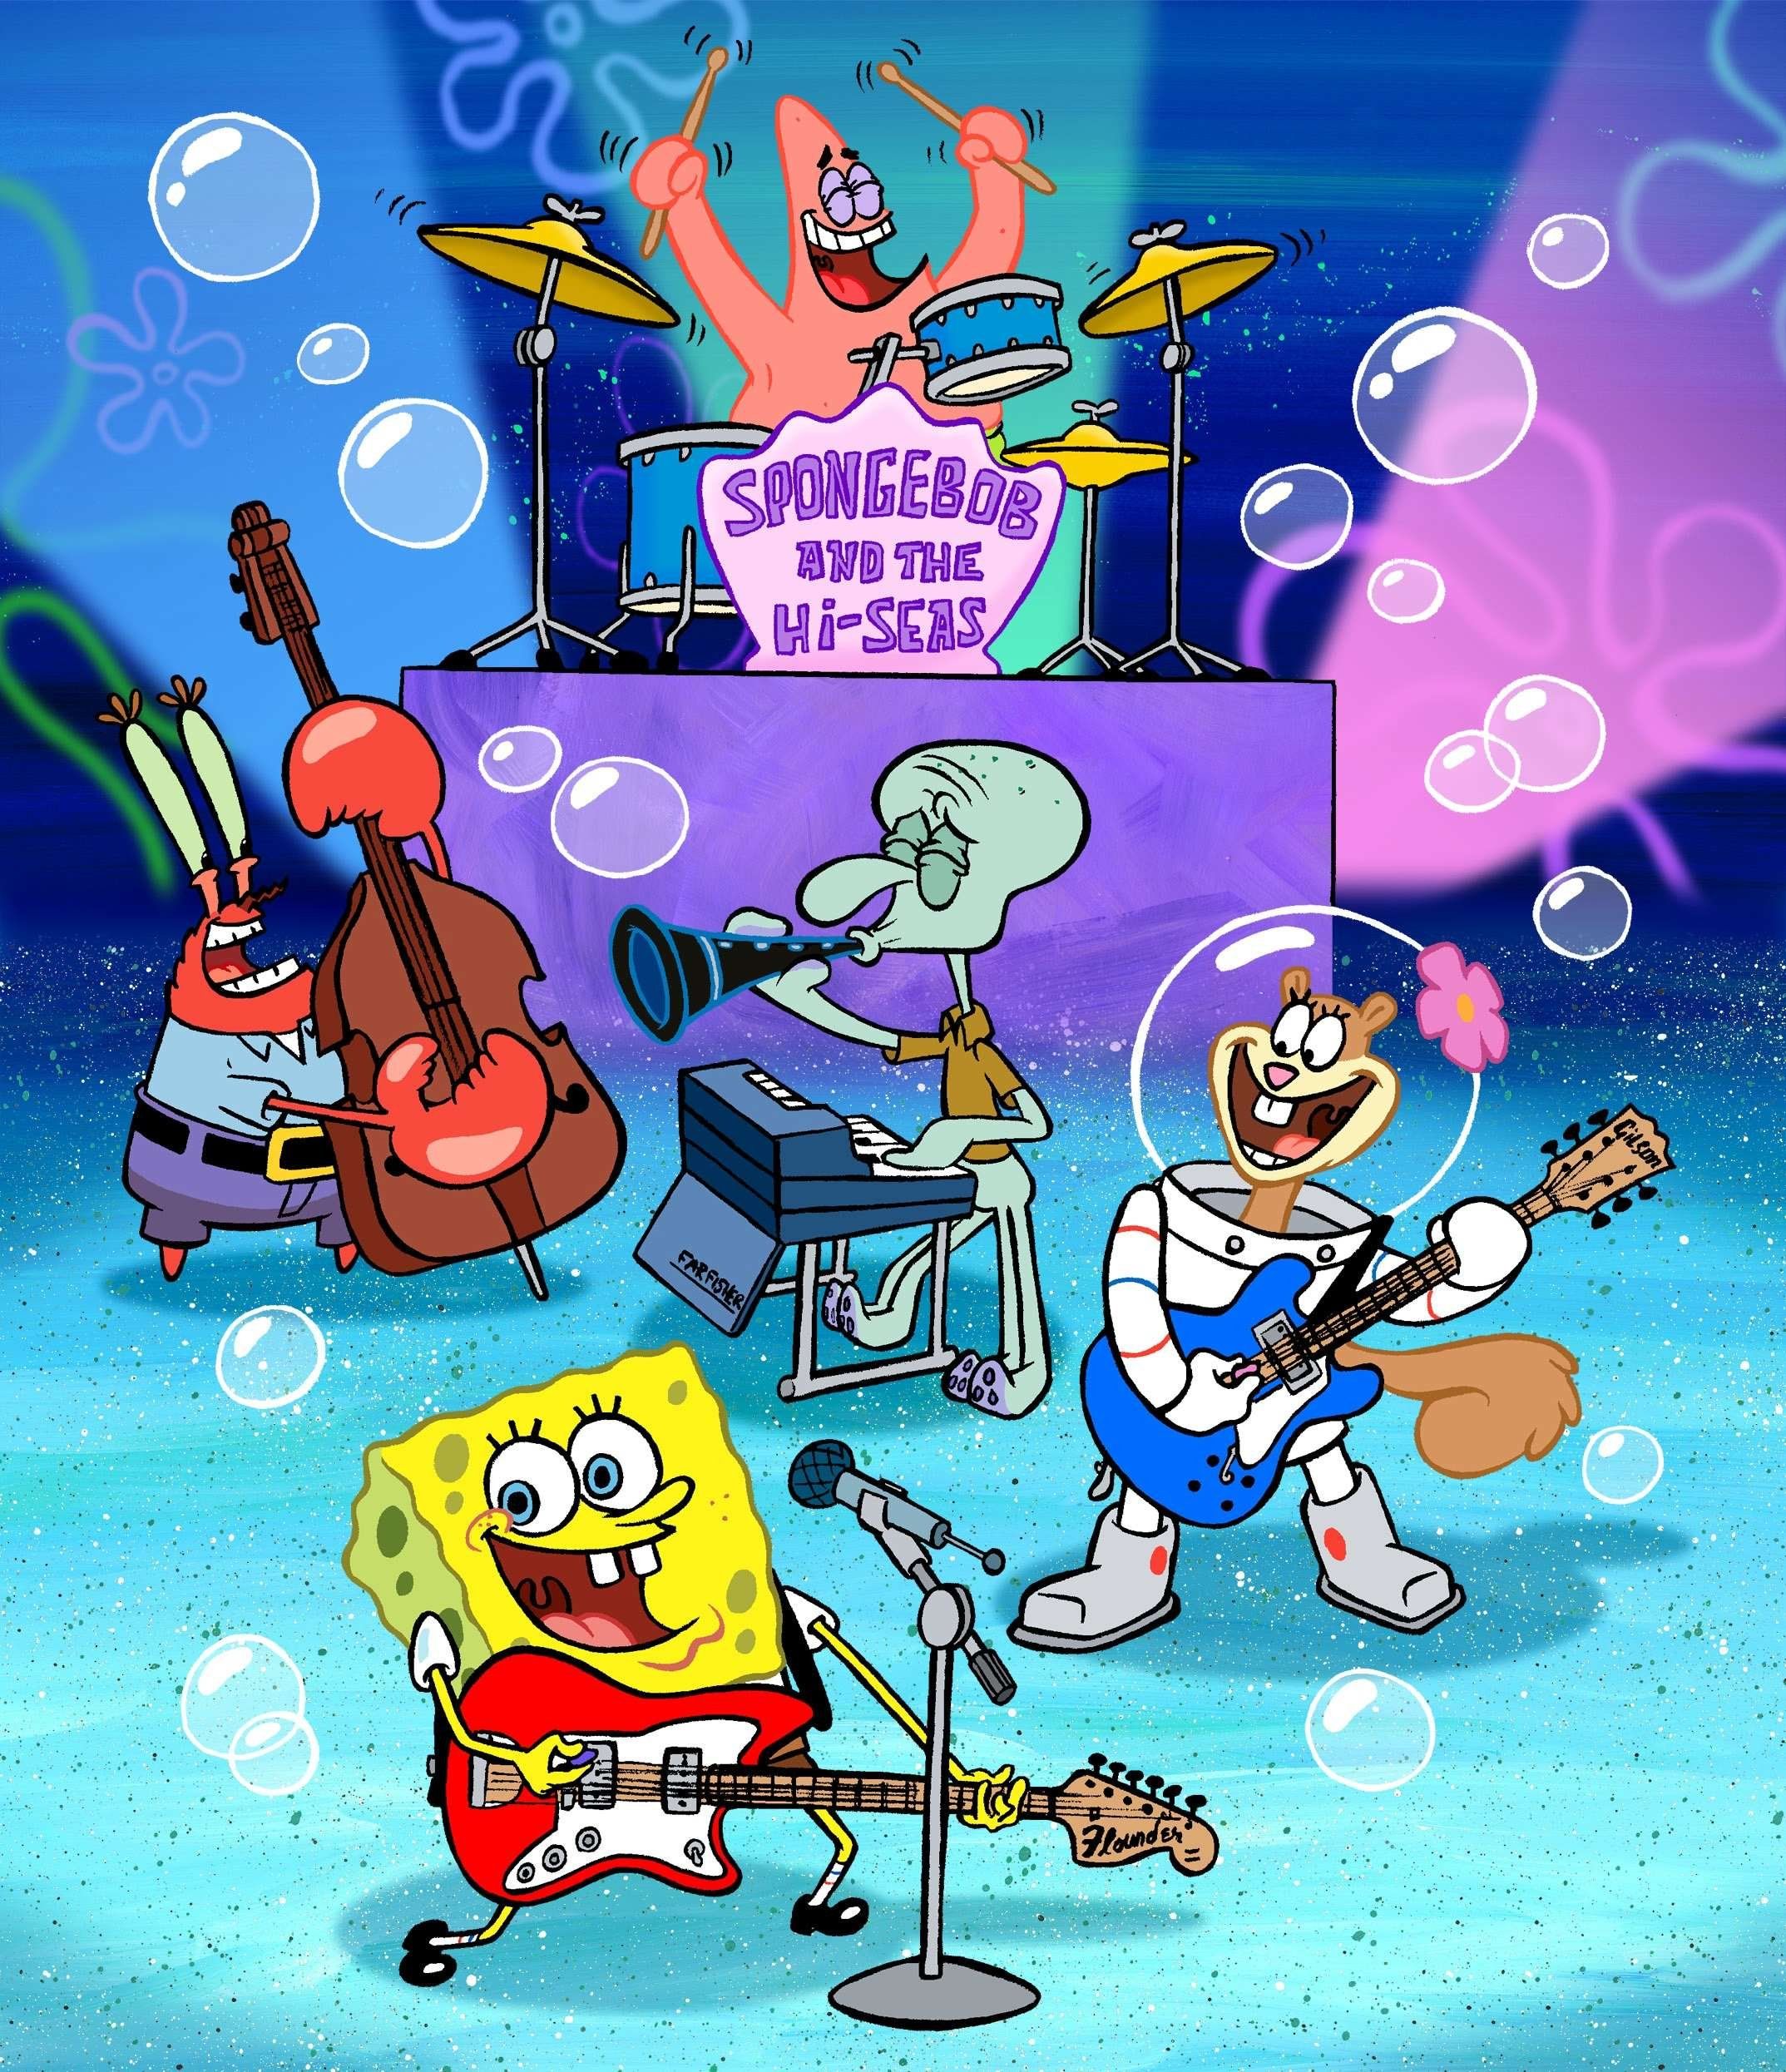 The cover of SpongeBob and the Hi-Seas' album, featuring the band members and their instruments. - SpongeBob